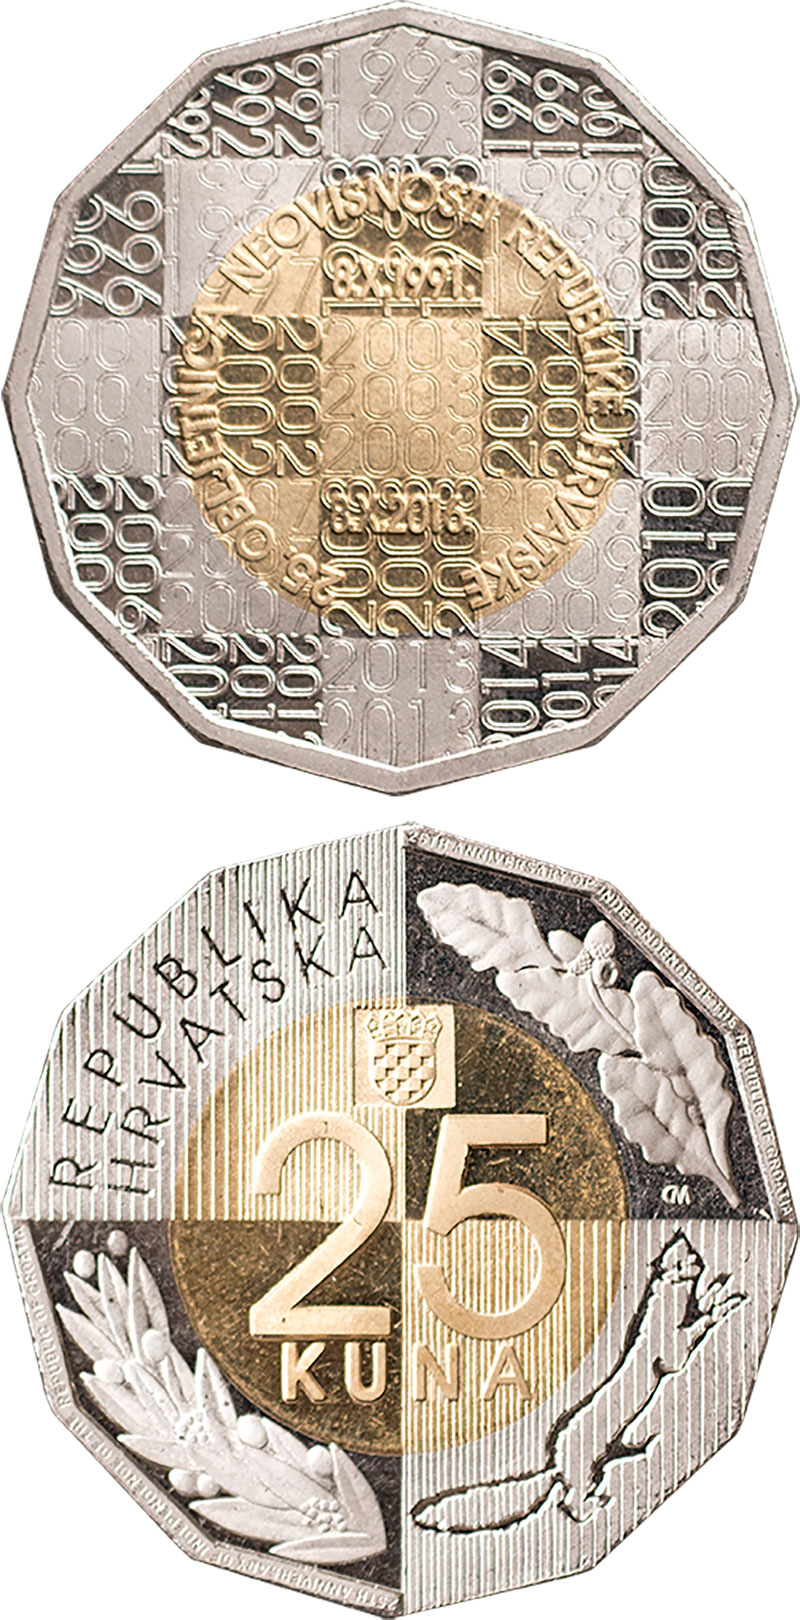 Image of 25 kuna coin - 25th Anniversary of Independence of the Republic of Croatia | Croatia 2016.  The Copper–Nickel (CuNi) coin is of BU quality.